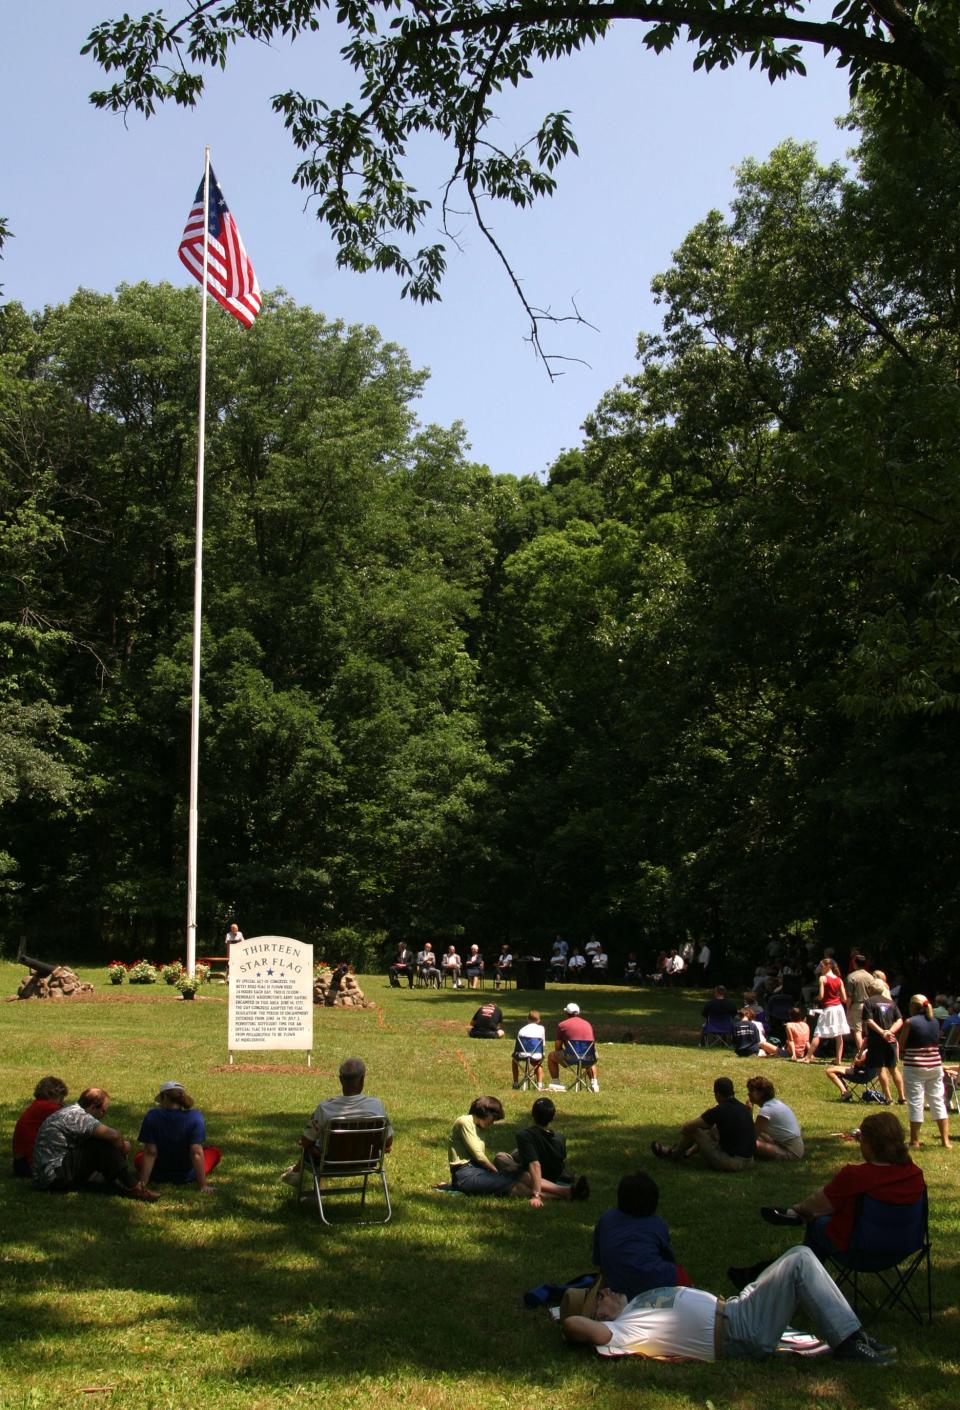 The Washington Camp Ground Association is responsible for the annual Fourth of July celebration at Camp Middlebrook on the Bridgewater-Bound Brook border.